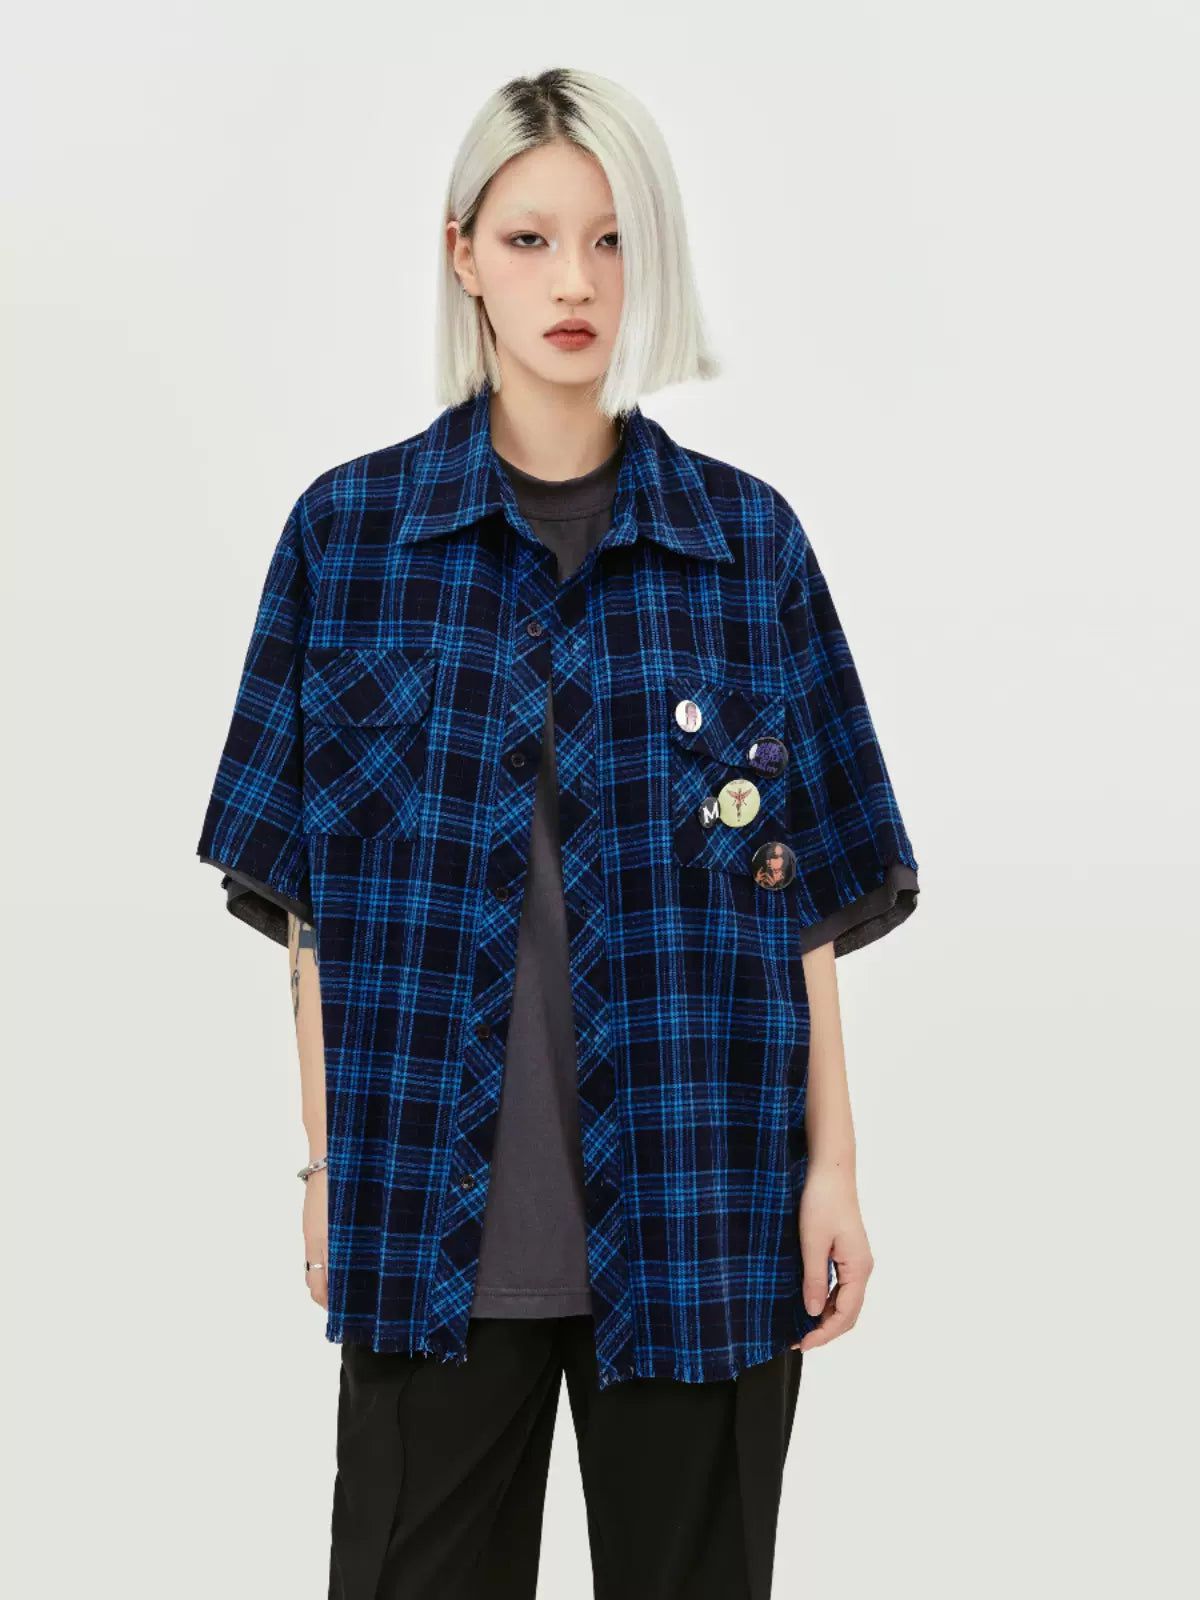 Layered 2-in-1 T-Shirt & Plaid Shirt Korean Street Fashion Shirt By Made Extreme Shop Online at OH Vault